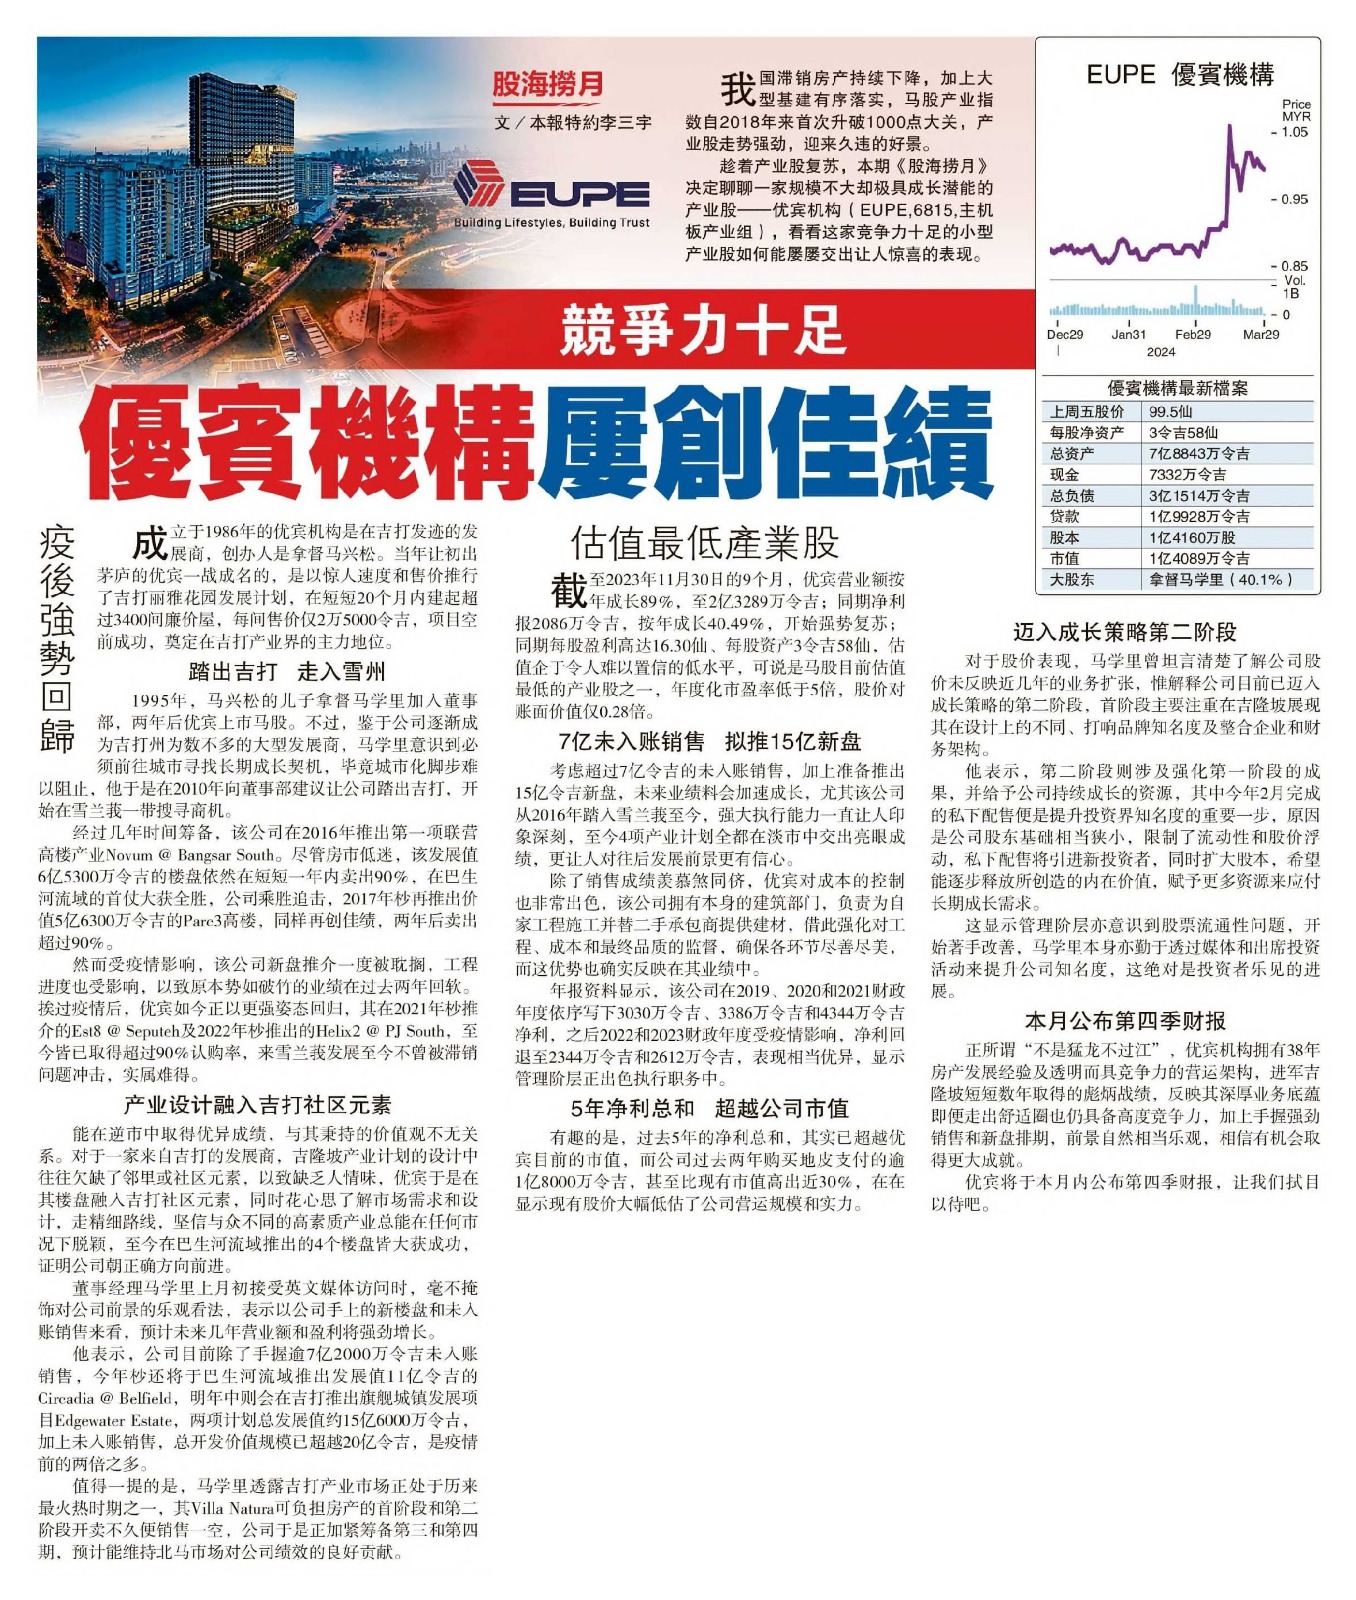 Sin Chew Daily: EUPE is highly competitive and achieves great results most of the time